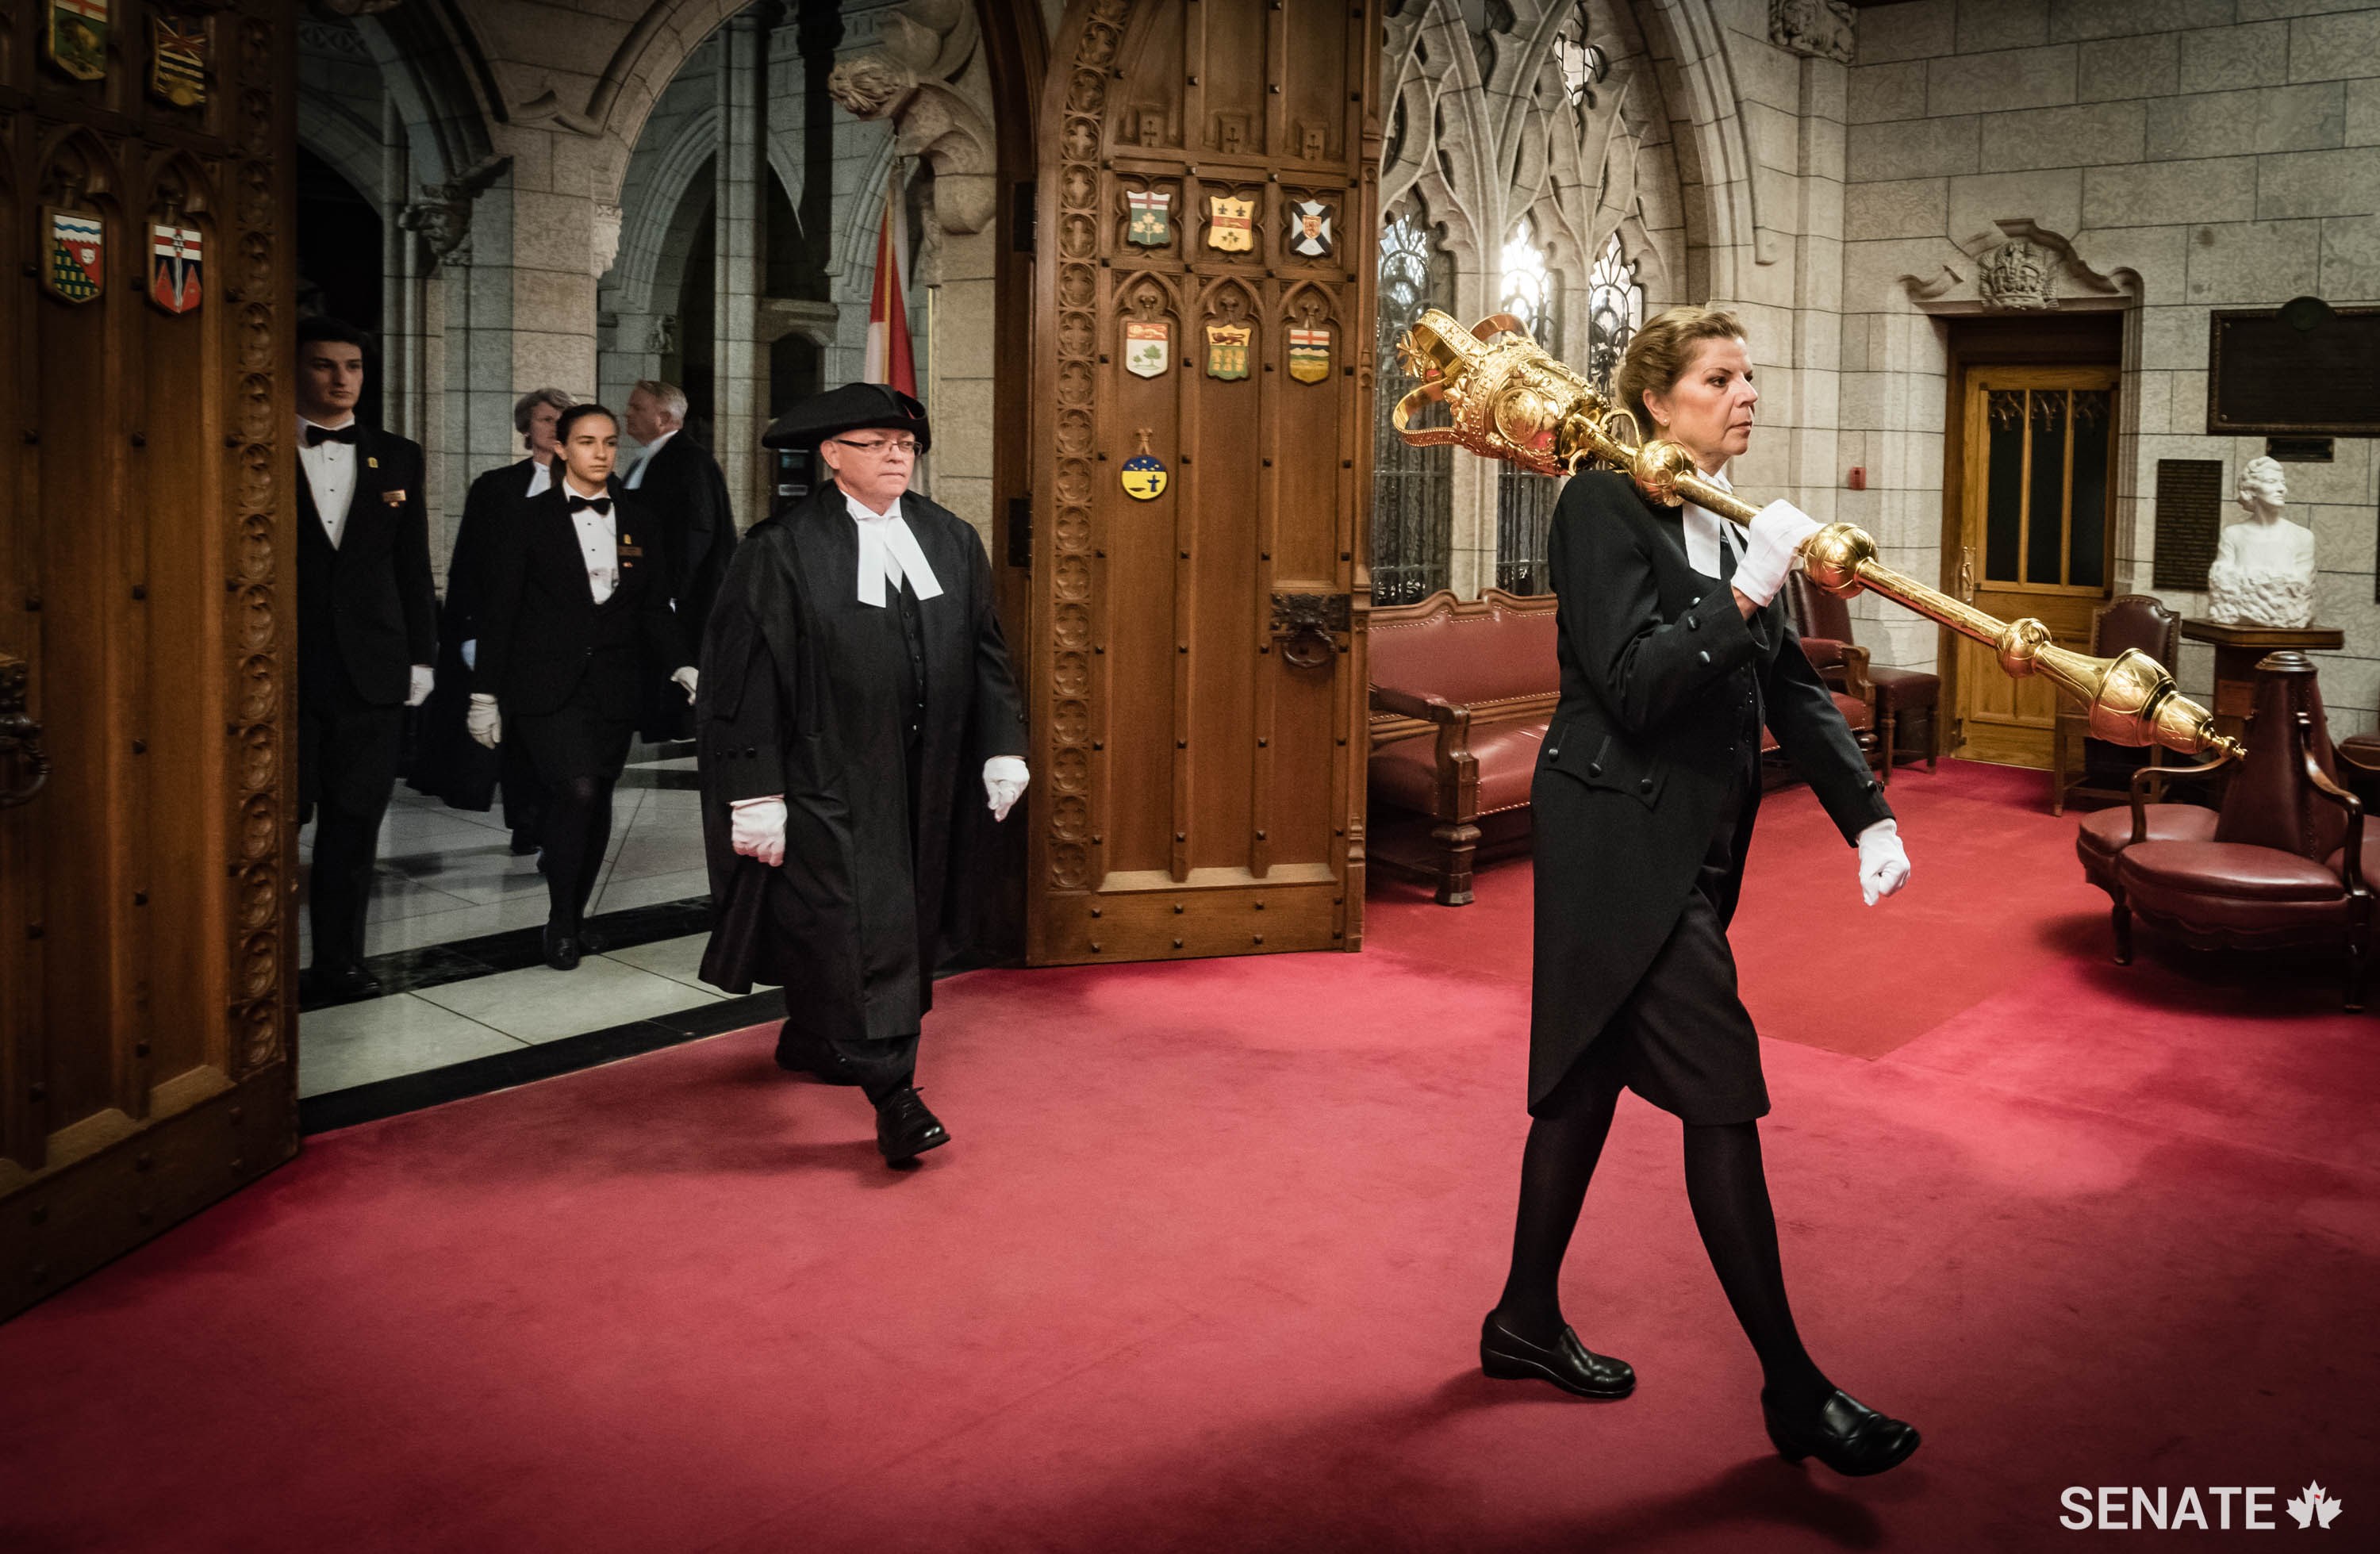 The arrival of the mace and the Speaker in the Red Chamber must take place before the Senate can begin to conduct its business.